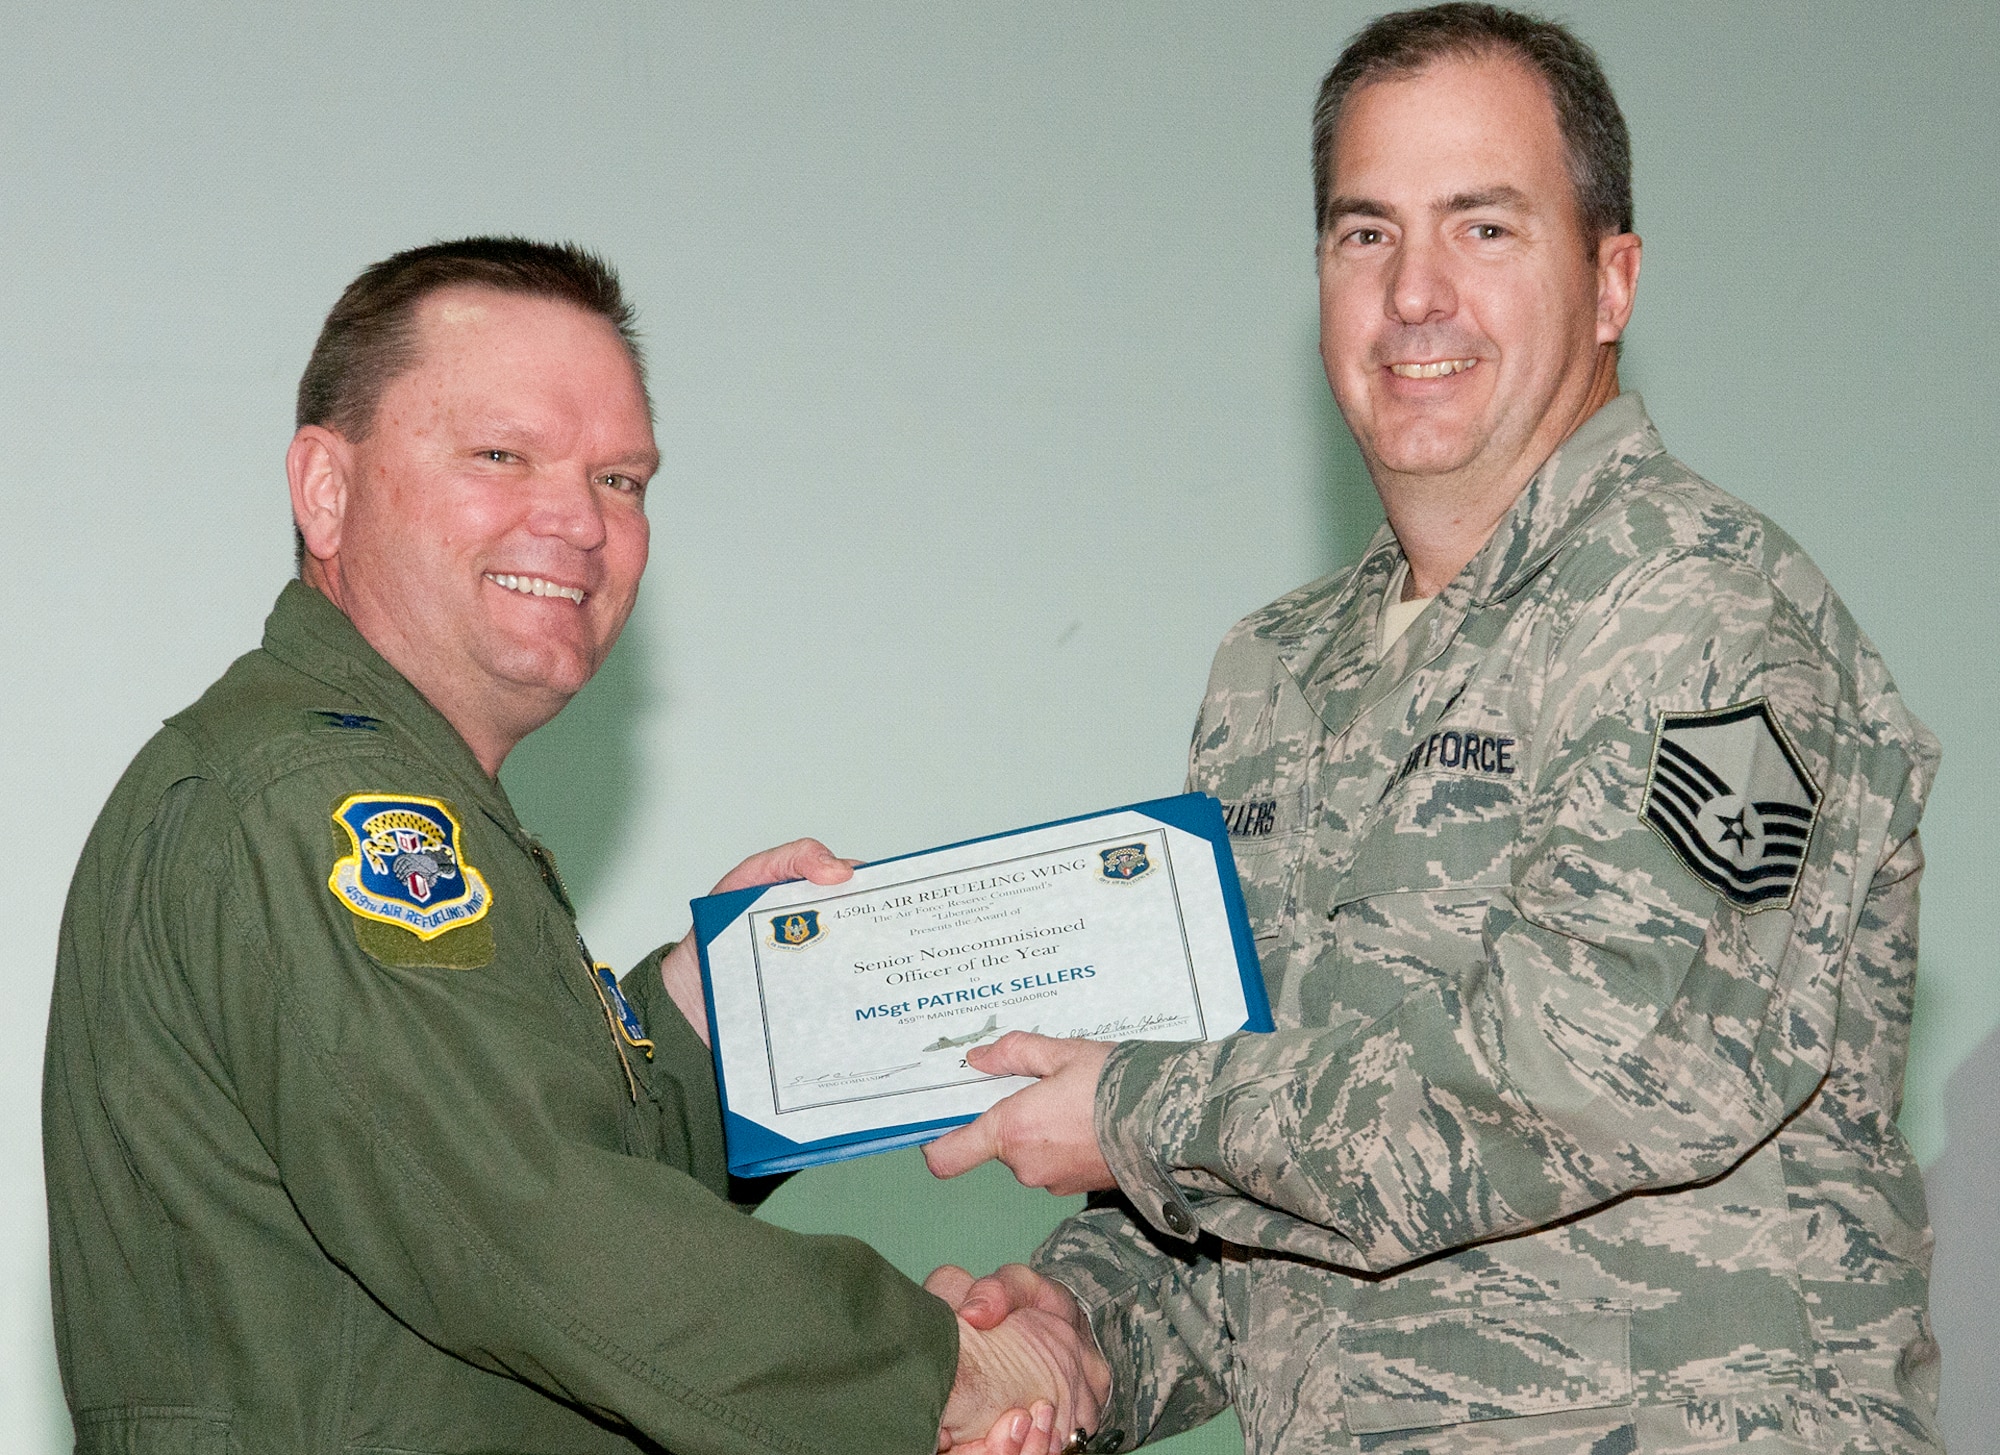 JOINT BASE ANDREWS, Md. -- Col. Samuel Mahaney, 459th Air Refueling Wing commander, congratulates Master Sgt. Patrick Sellers, 459th Maintenance Squadron, for being awarded 459th ARW Senior Noncomissioned Officer of the Second Half 2011 during a commander's call here Feb. 12, 2012. (U.S. Air Force photo/Staff Sgt. Brent Skeen)